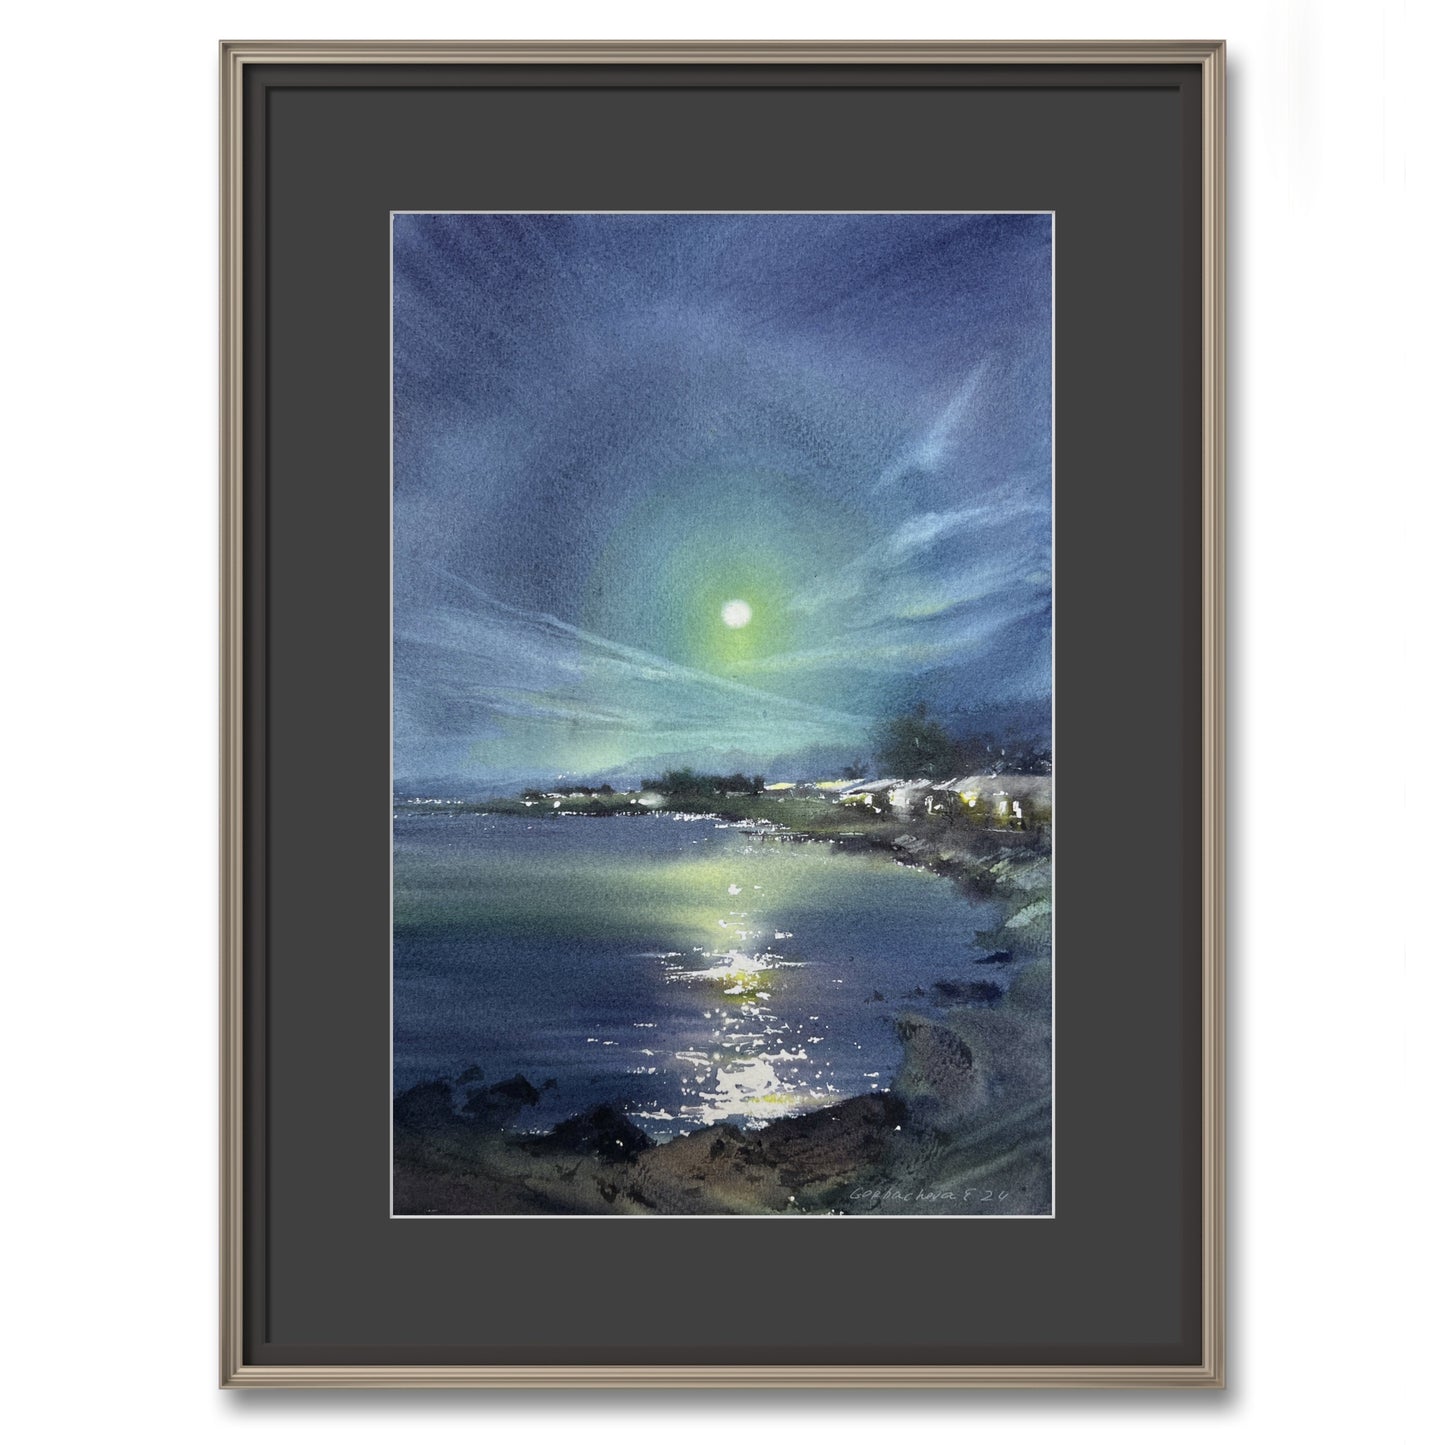 Seascape Painting Original, Small Watercolor Artwork - In the moonlight #4